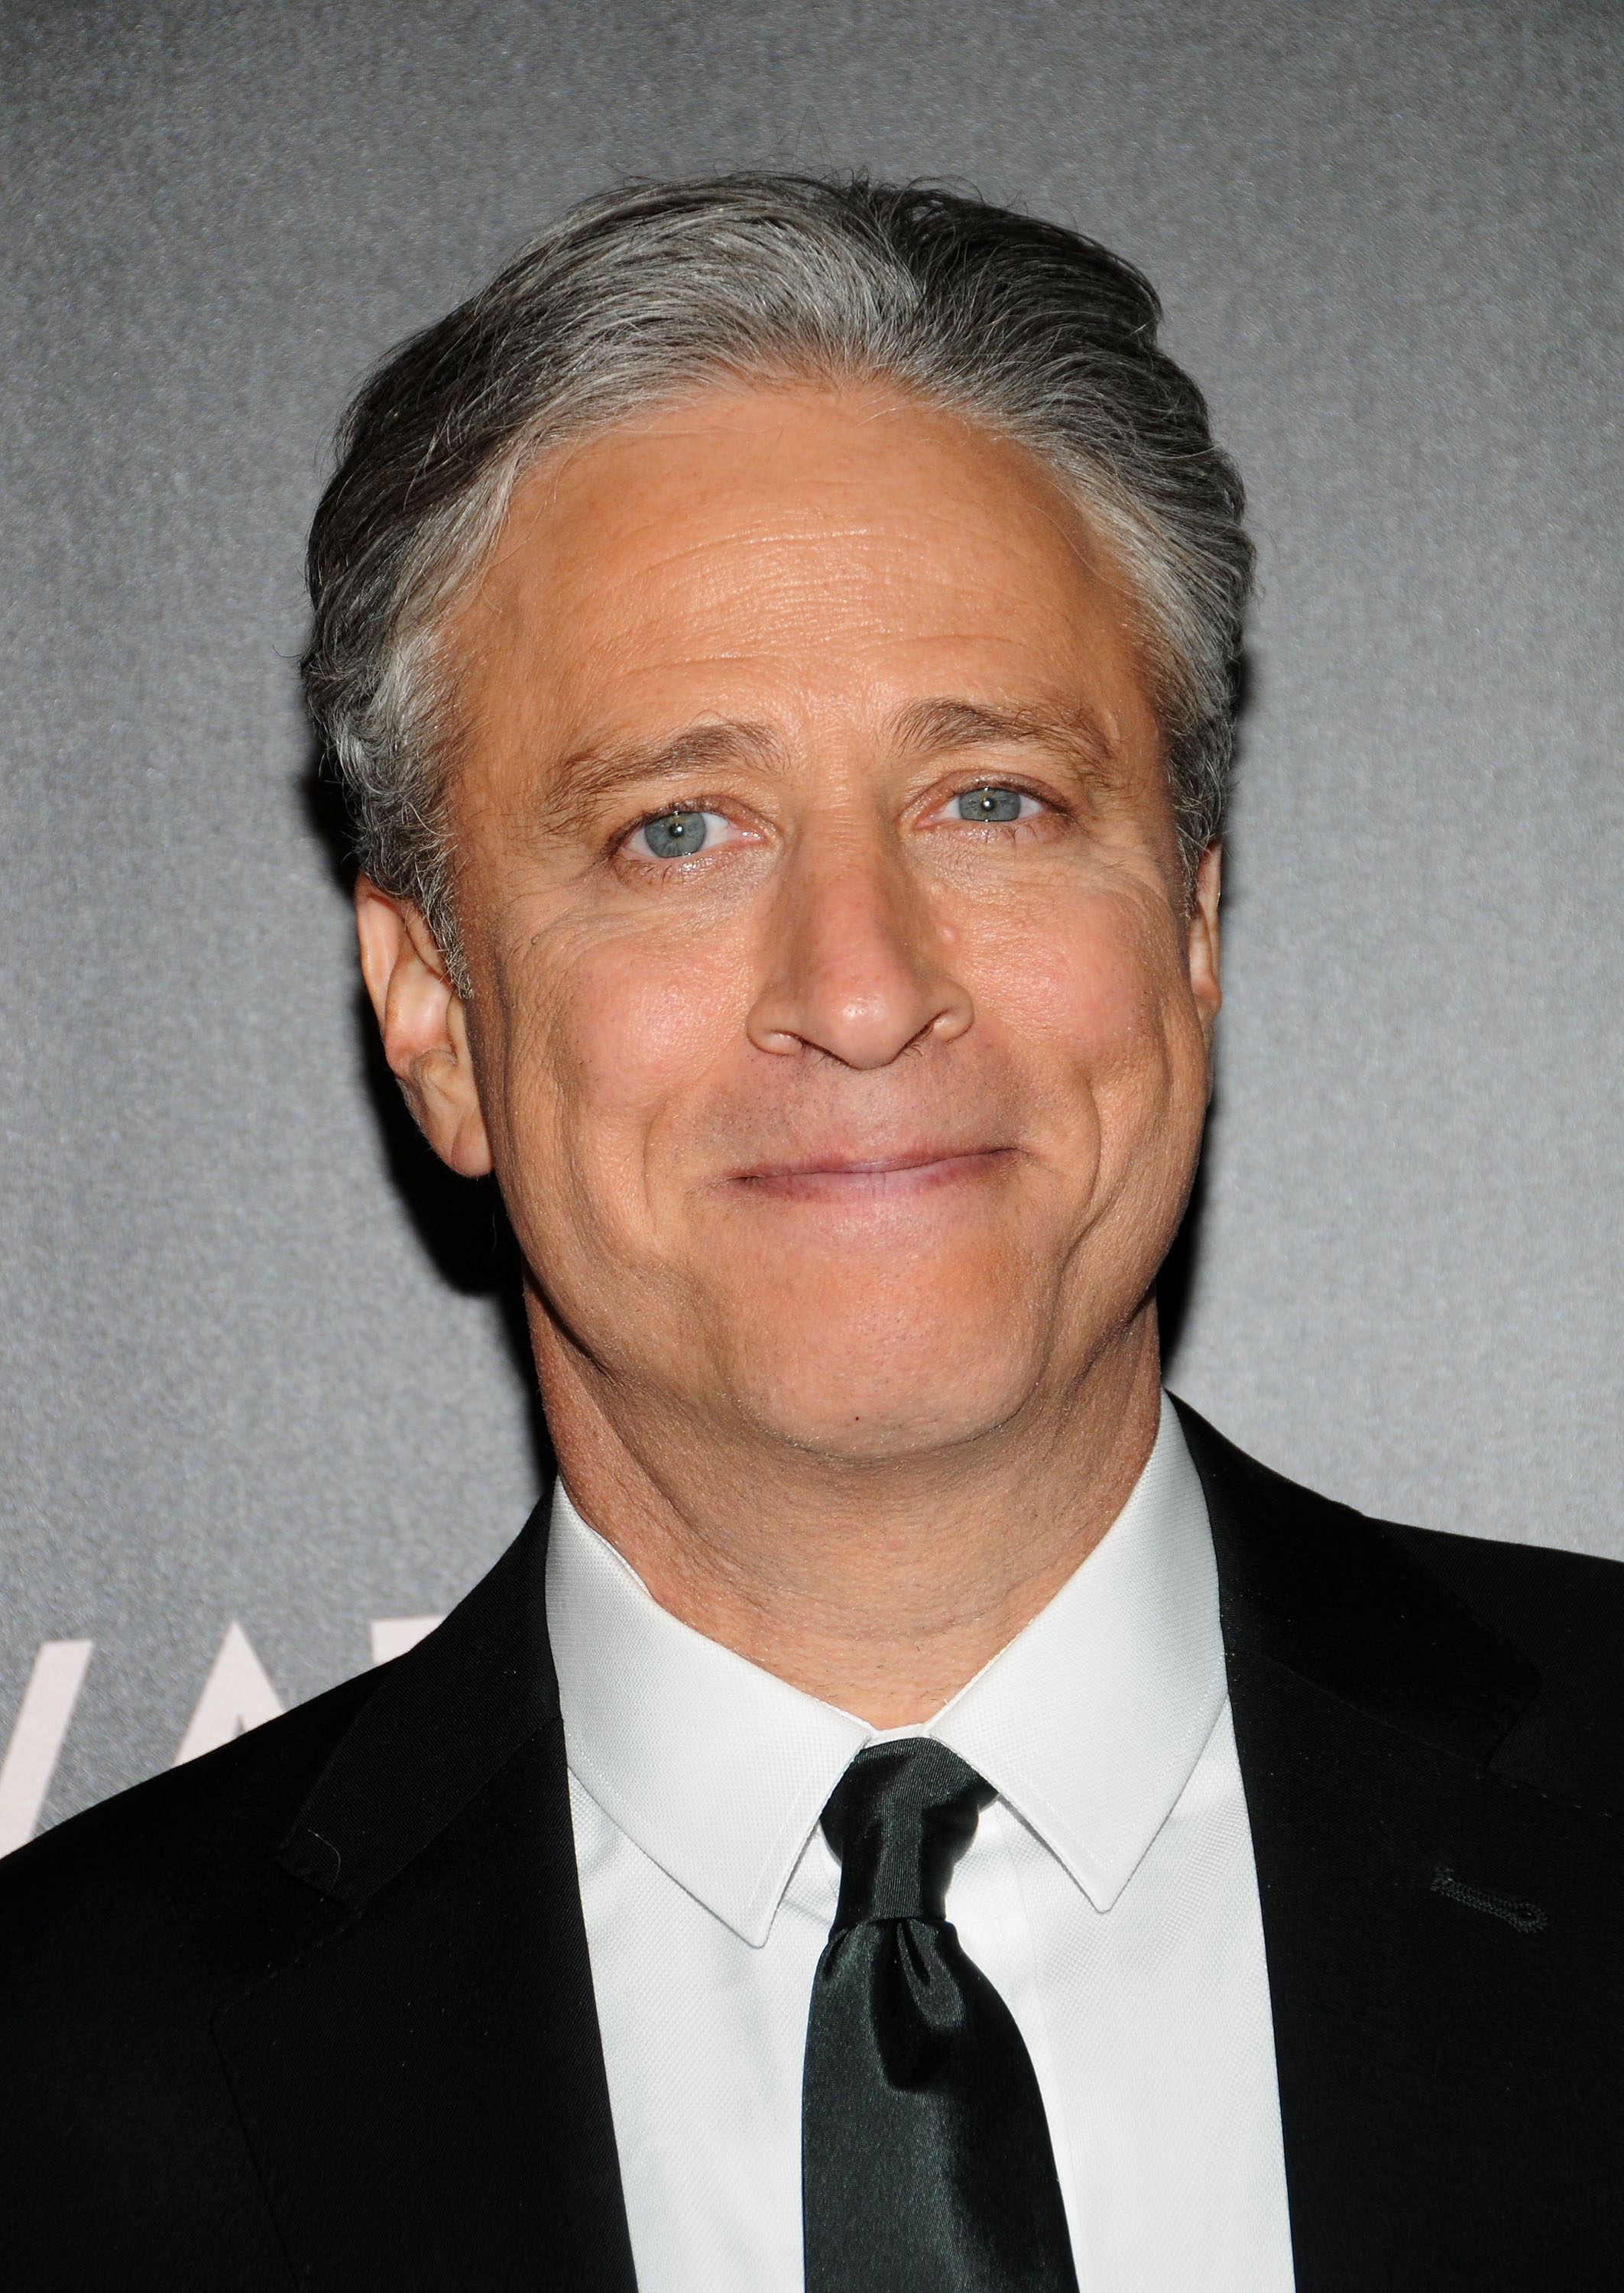 Director/writer/producer Jon Stewart attends "Rosewater" New York Premiere at AMC Lincoln Square Theater on November 12, 2014 in New York City. (Desiree Navarro&amp;mdash;WireImage)